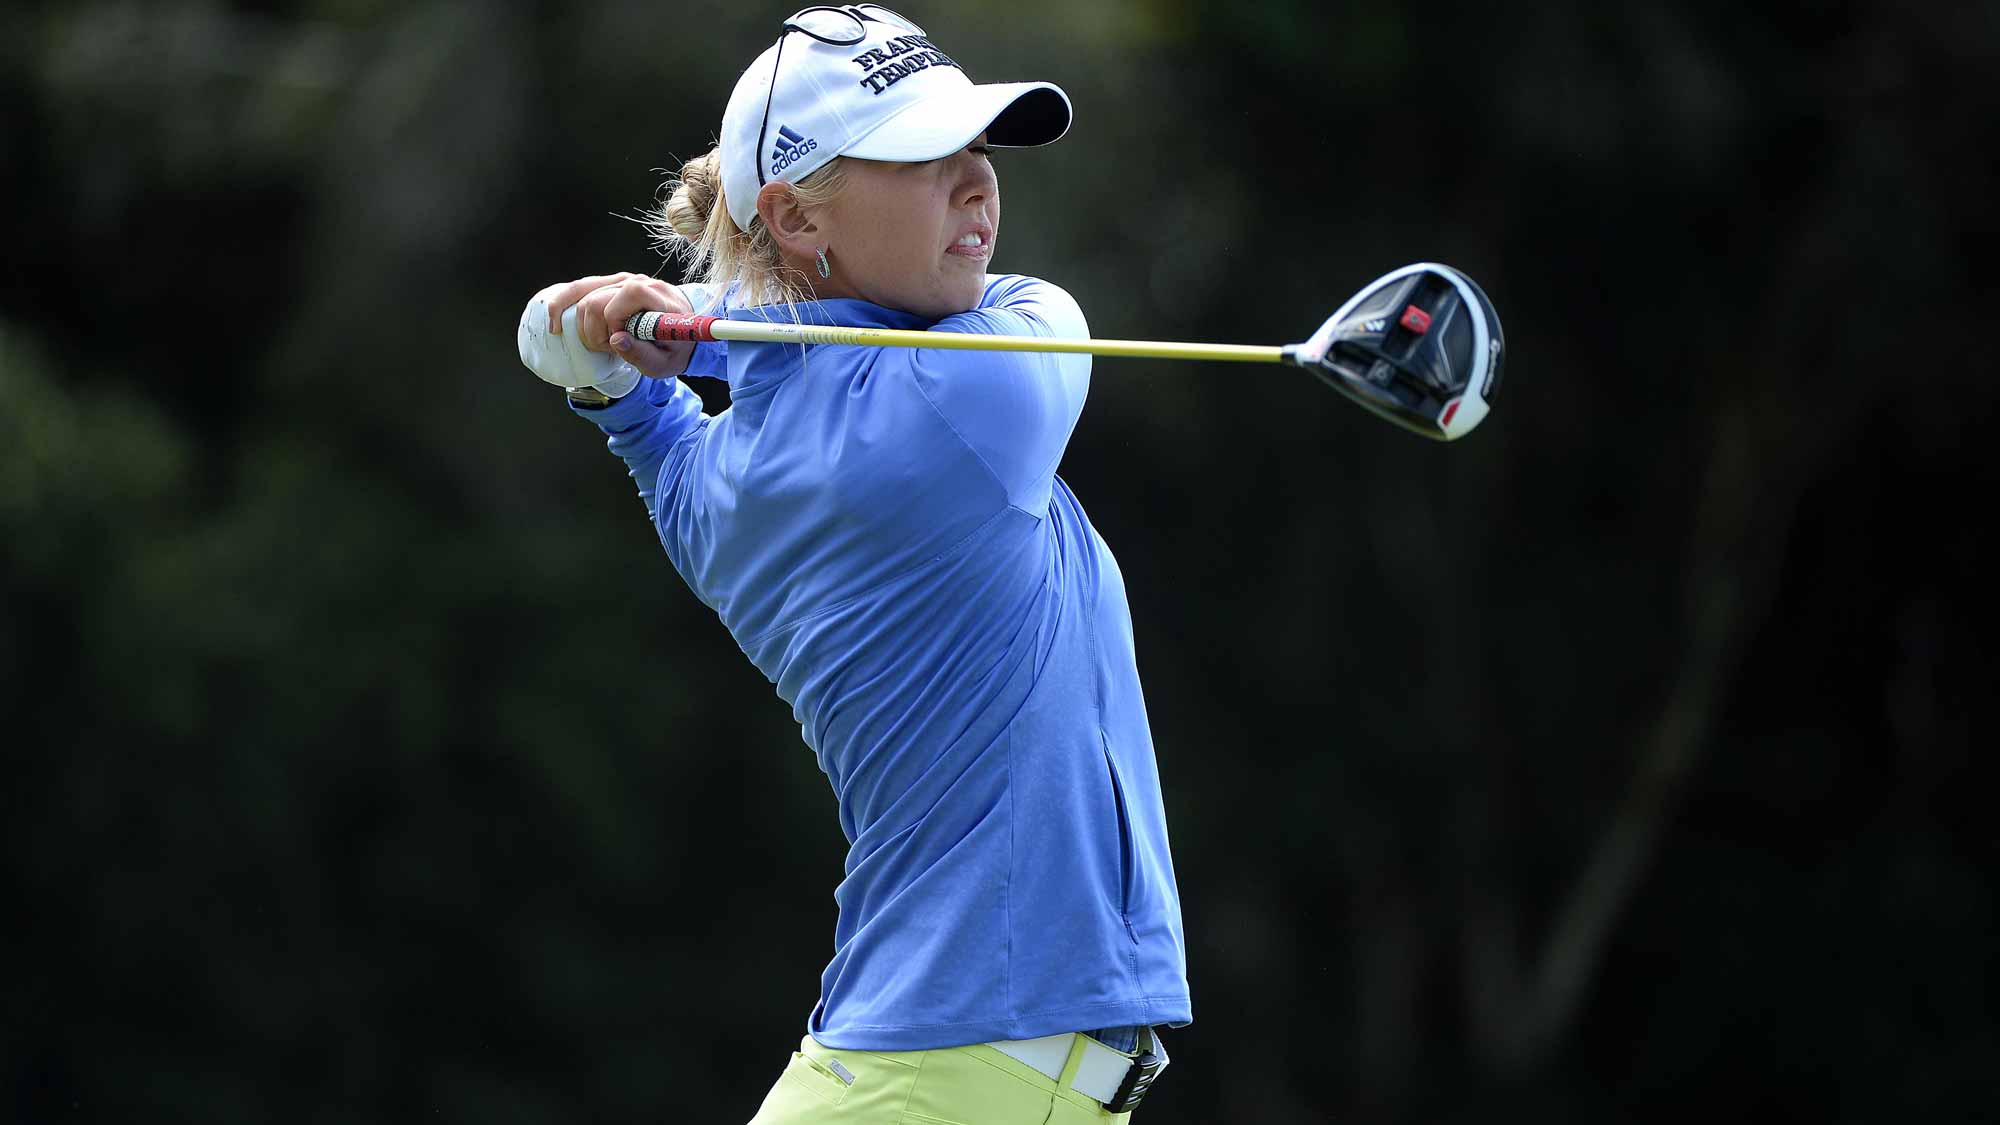 Jessica Korda tees off on the second hole during the final round of the KIA Classic